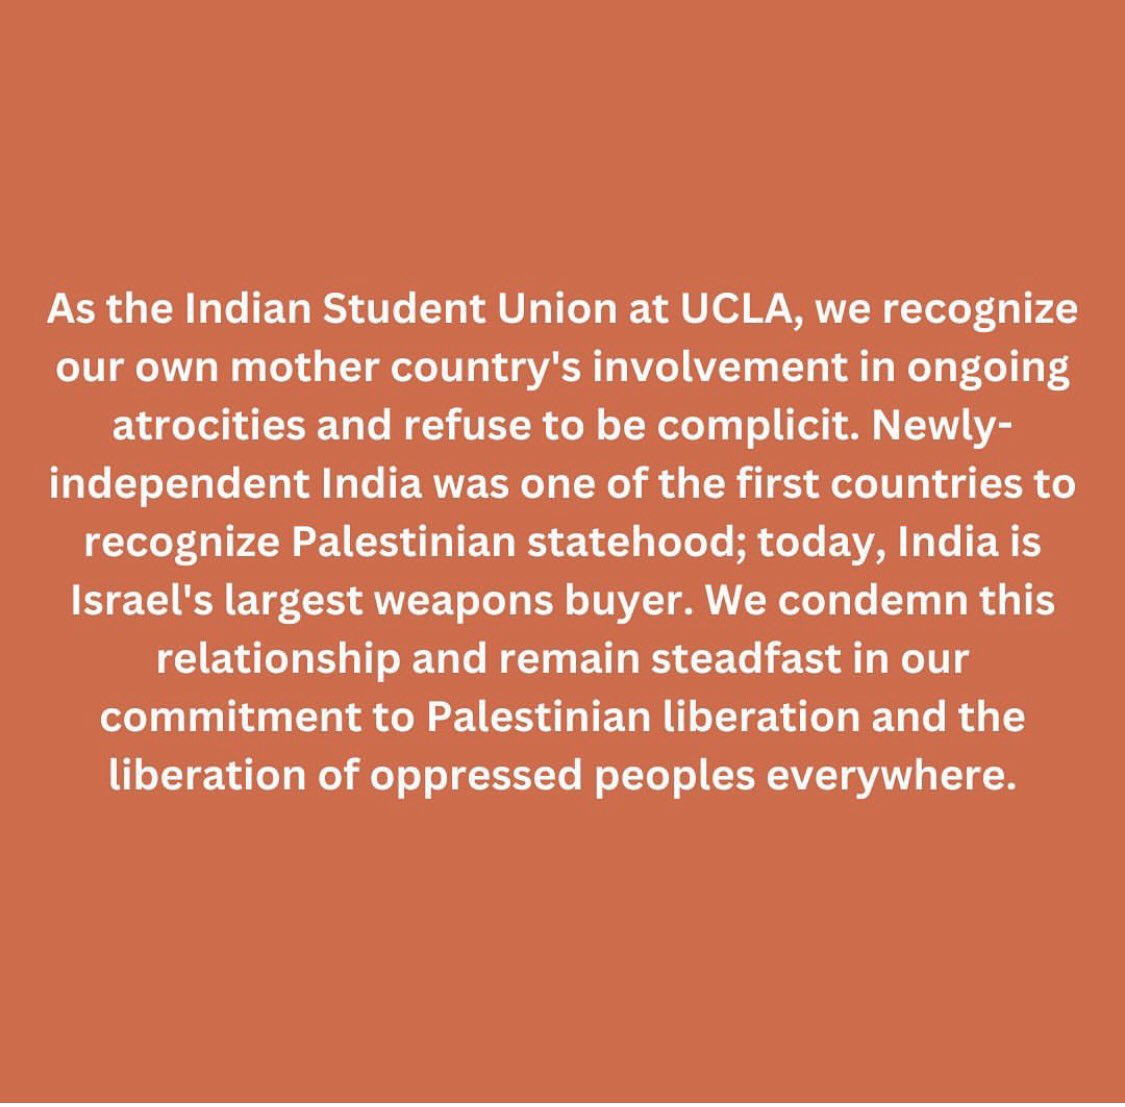 Loved this statement from an Indian student group at UCLA!!!